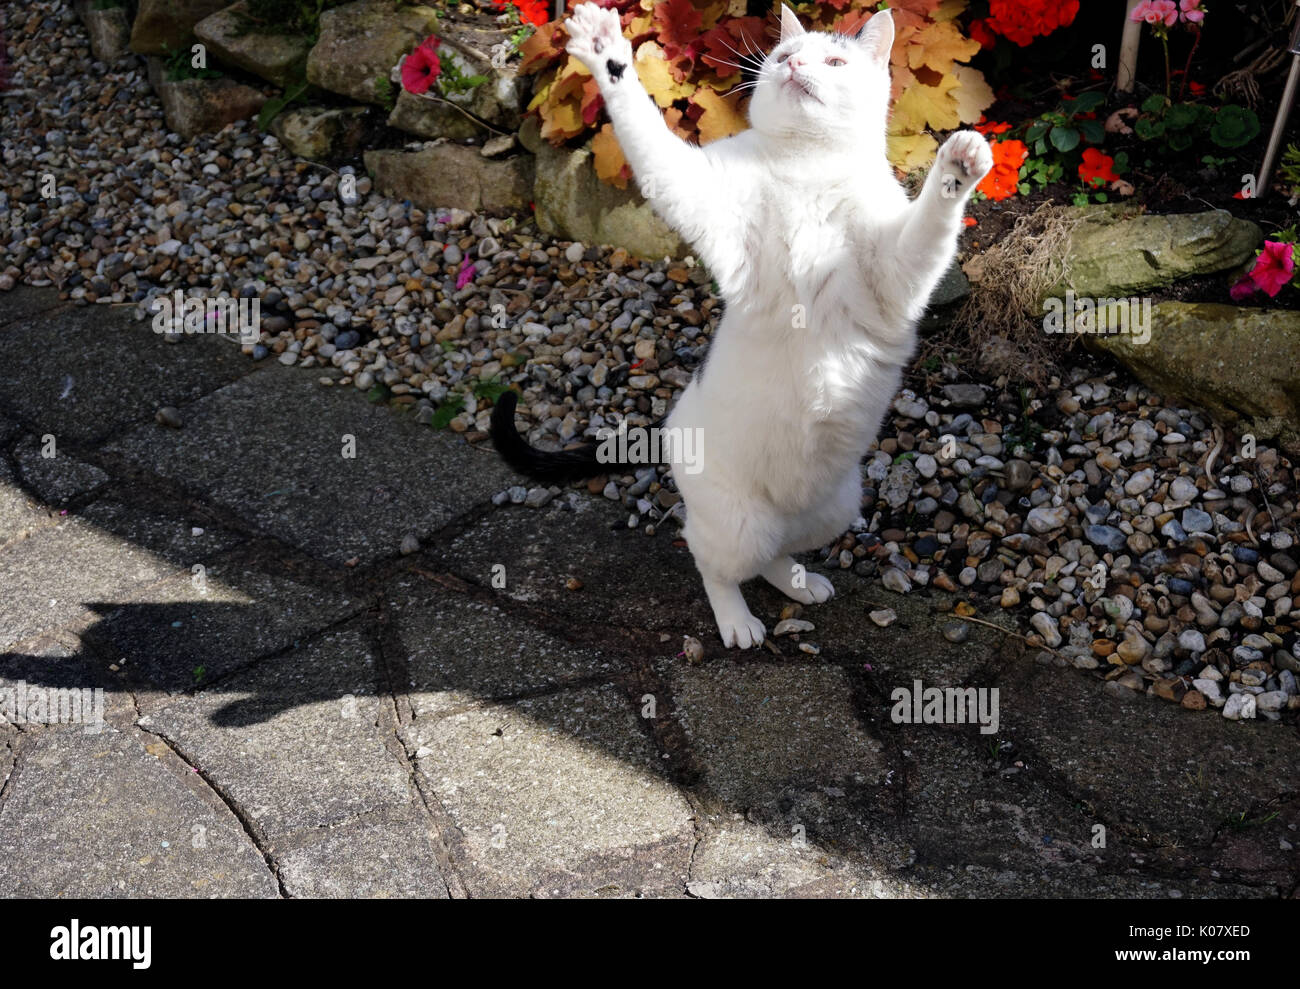 WHITE AND BLACK DOMESTIC SHORT HAIRED BREED ADULT FEMALE PET CAT PLAYING AND STANDING ON HER HIND LEGS WAVING HER PAWS dancing Stock Photo